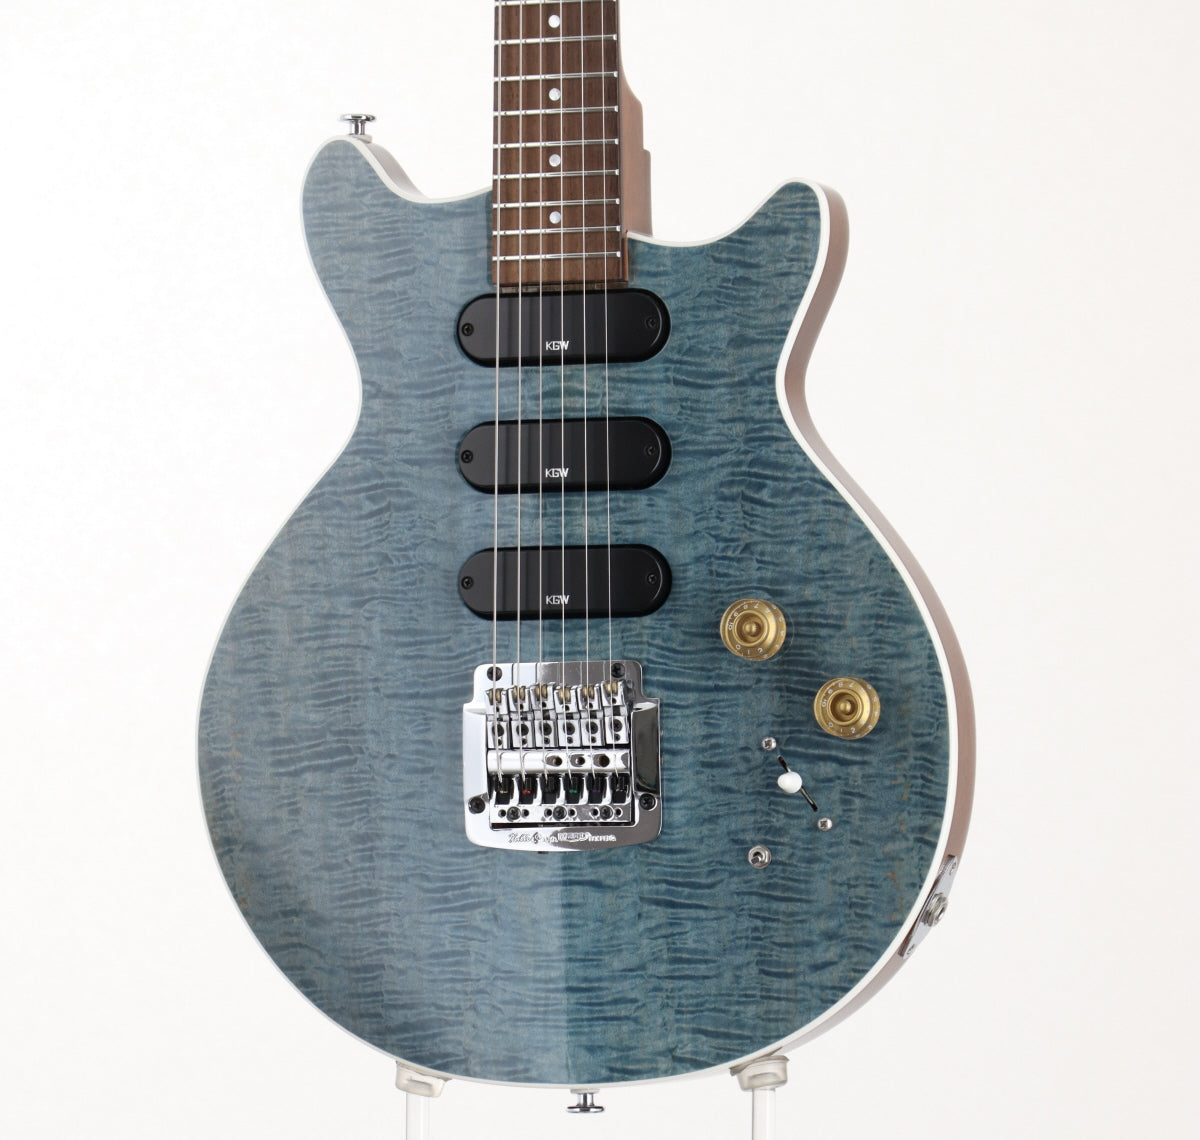 [SN T0021] USED Kz Guitar Works / Kz One Solid 3S11 Kahler See-through Blue [09]